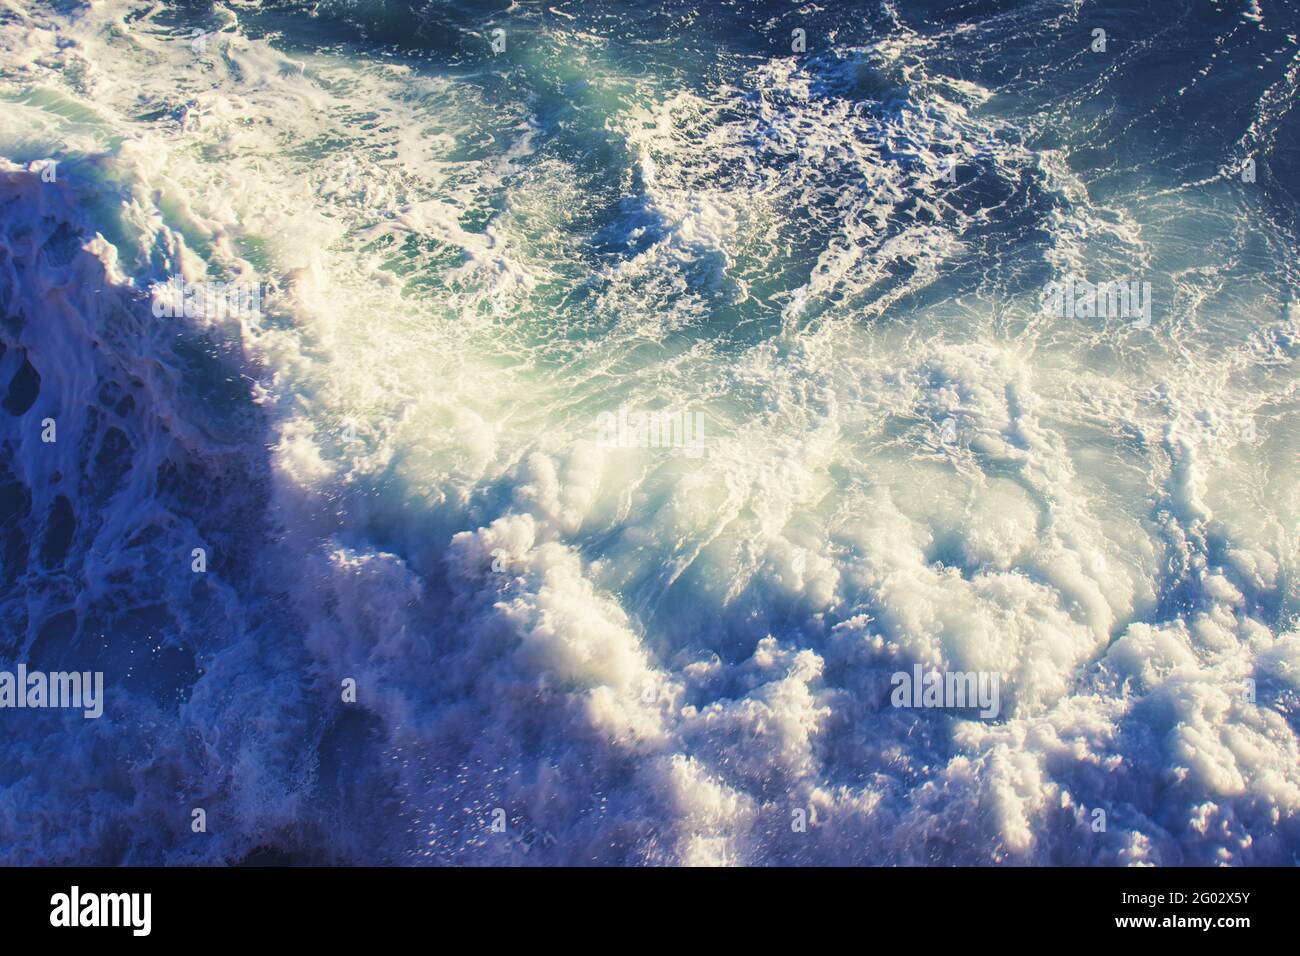 Sea waves crashing on the shore. Top view. Concept of power of nature. Stock Photo